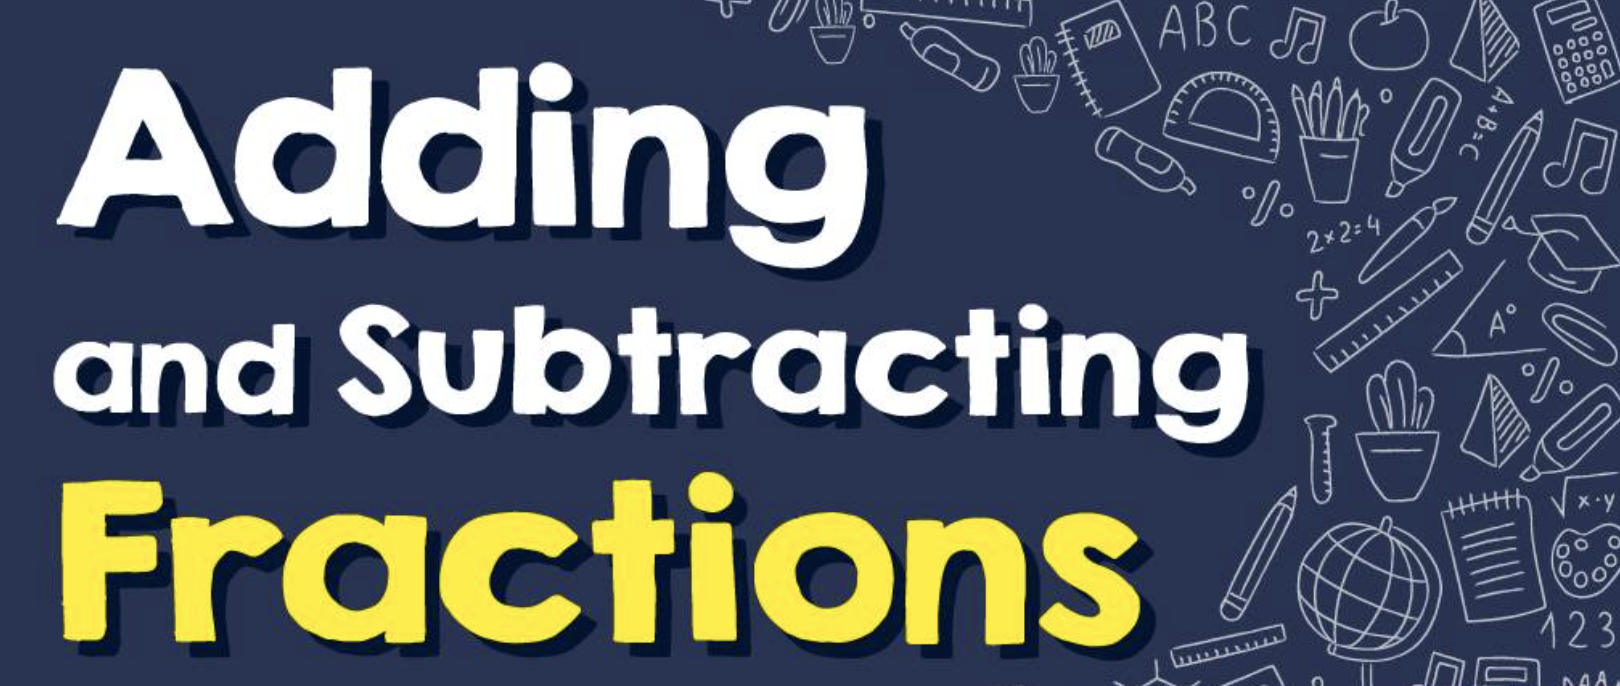 Subtracting Fractions with Like Denominators - Year 3 - Quizizz